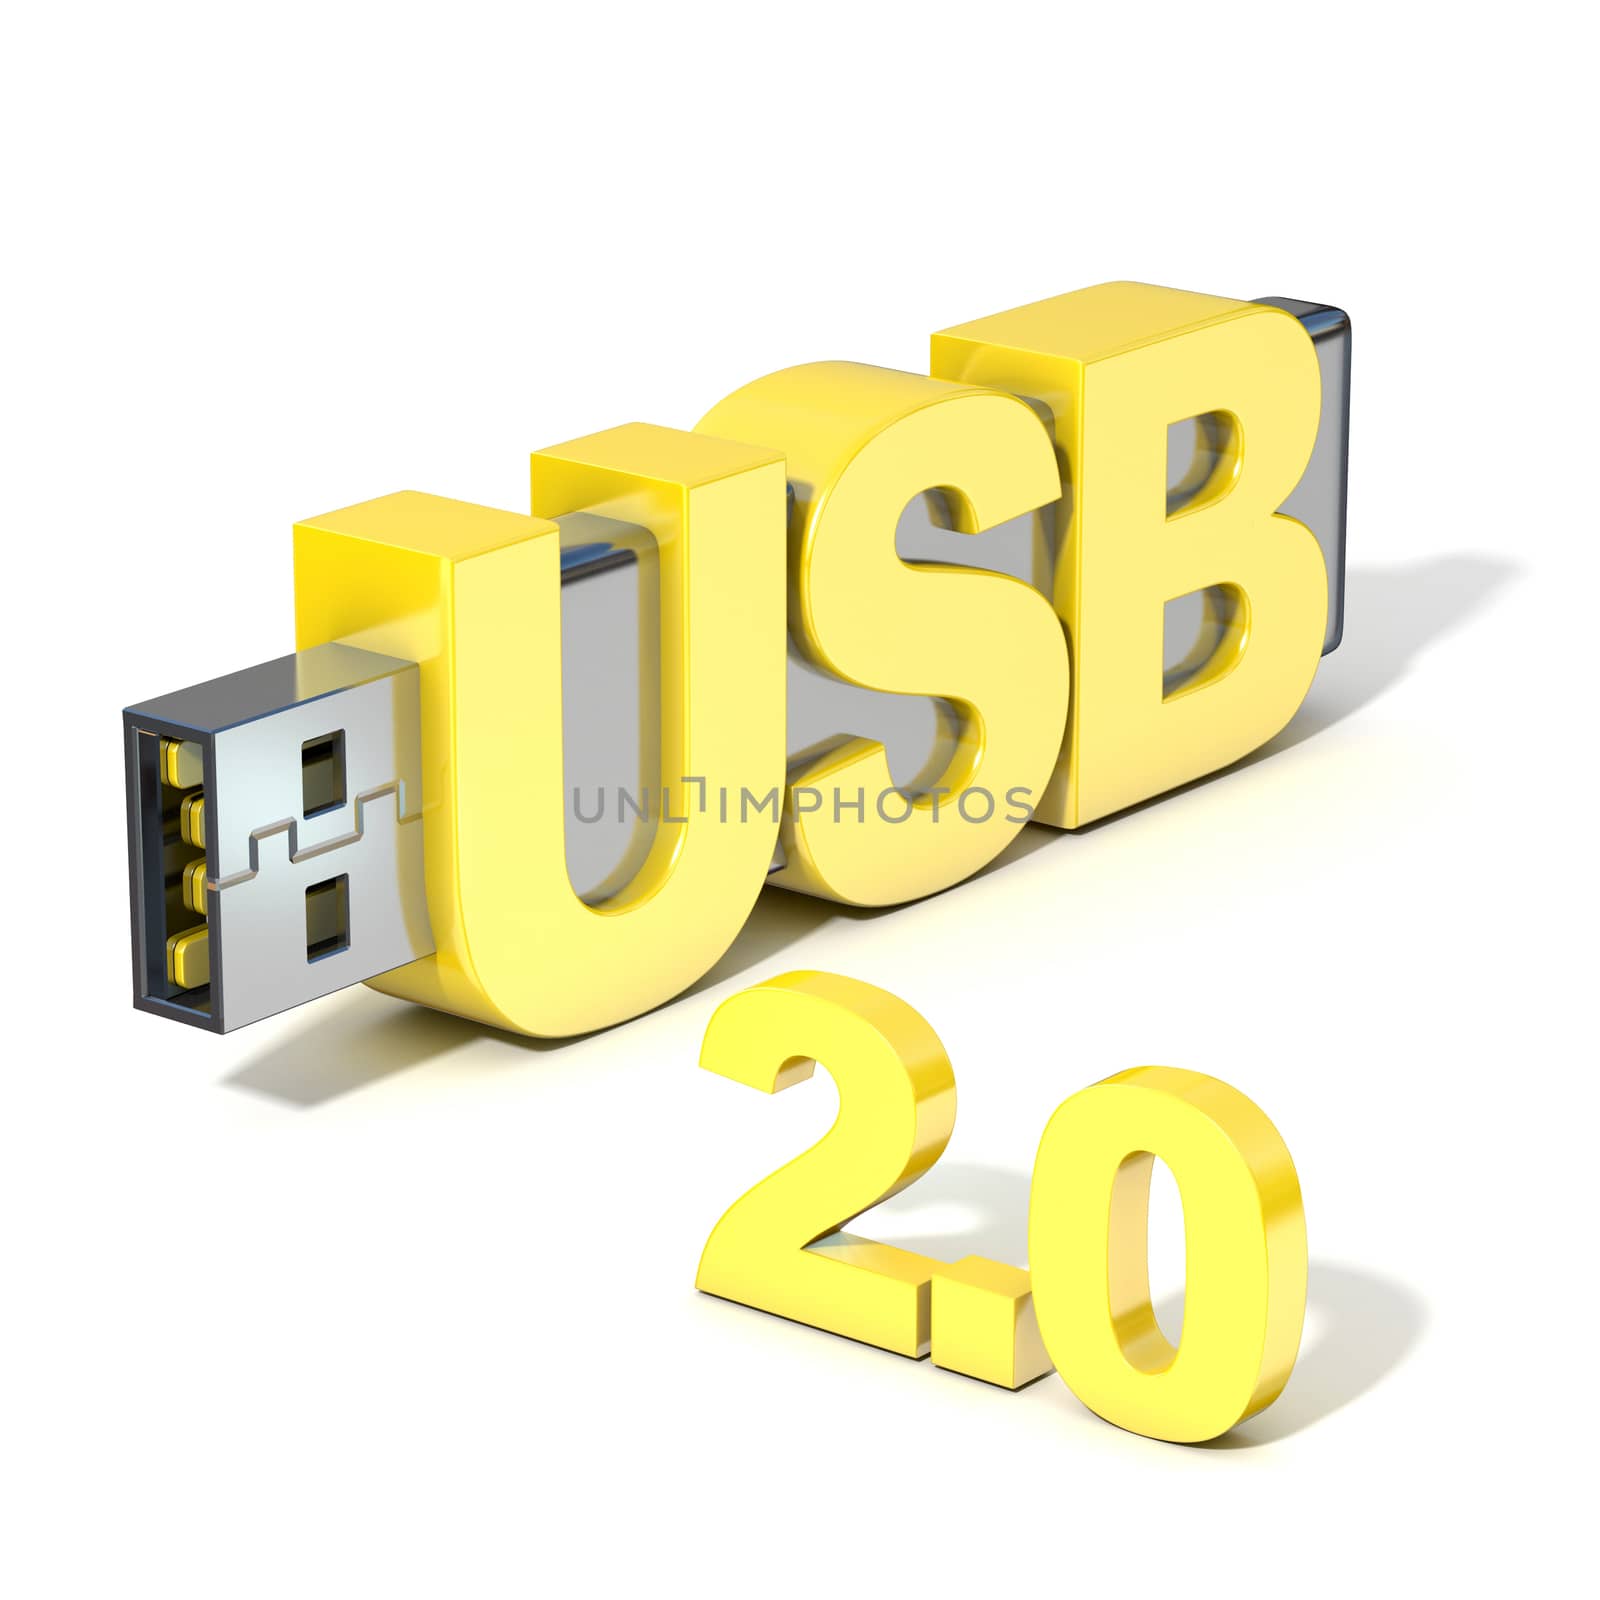 USB flash memory 2.0, made with the word USB. 3D render illustration isolated on white background